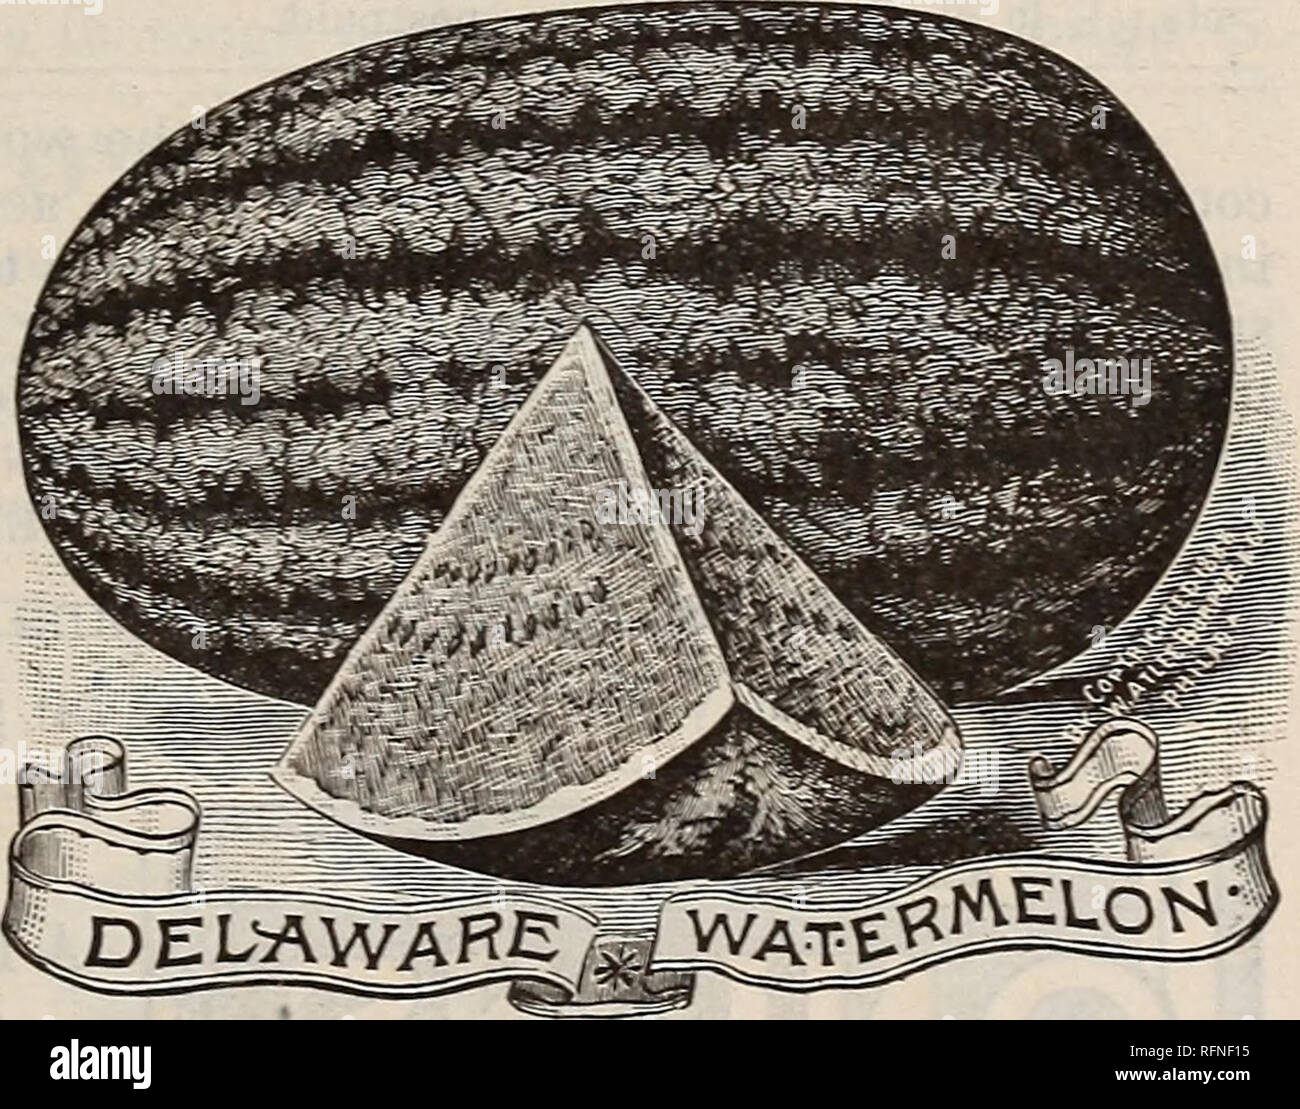 . Burpee's farm annual written at Fordhook Farm. Nurseries (Horticulture) Pennsylvania Philadelphia Catalogs; Vegetables Seeds Catalogs; Plants, Ornamental Catalogs; Flowers Seeds Catalogs. NEW WATERMELON, —COLE'S EARLY. WATERMELON,-COLE'S EARLY. This is one of the finest early watermelons ; of medium size, form and markings shown in the illustration, engraved from a photograph. It is so early that it matures in every State ; very hardy ; the flesh is deep red in color, clear to the rind, and &quot;is most sweet and delicate in flavor. It is exceedingly brittle, and hence cannot be shipped to  Stock Photo